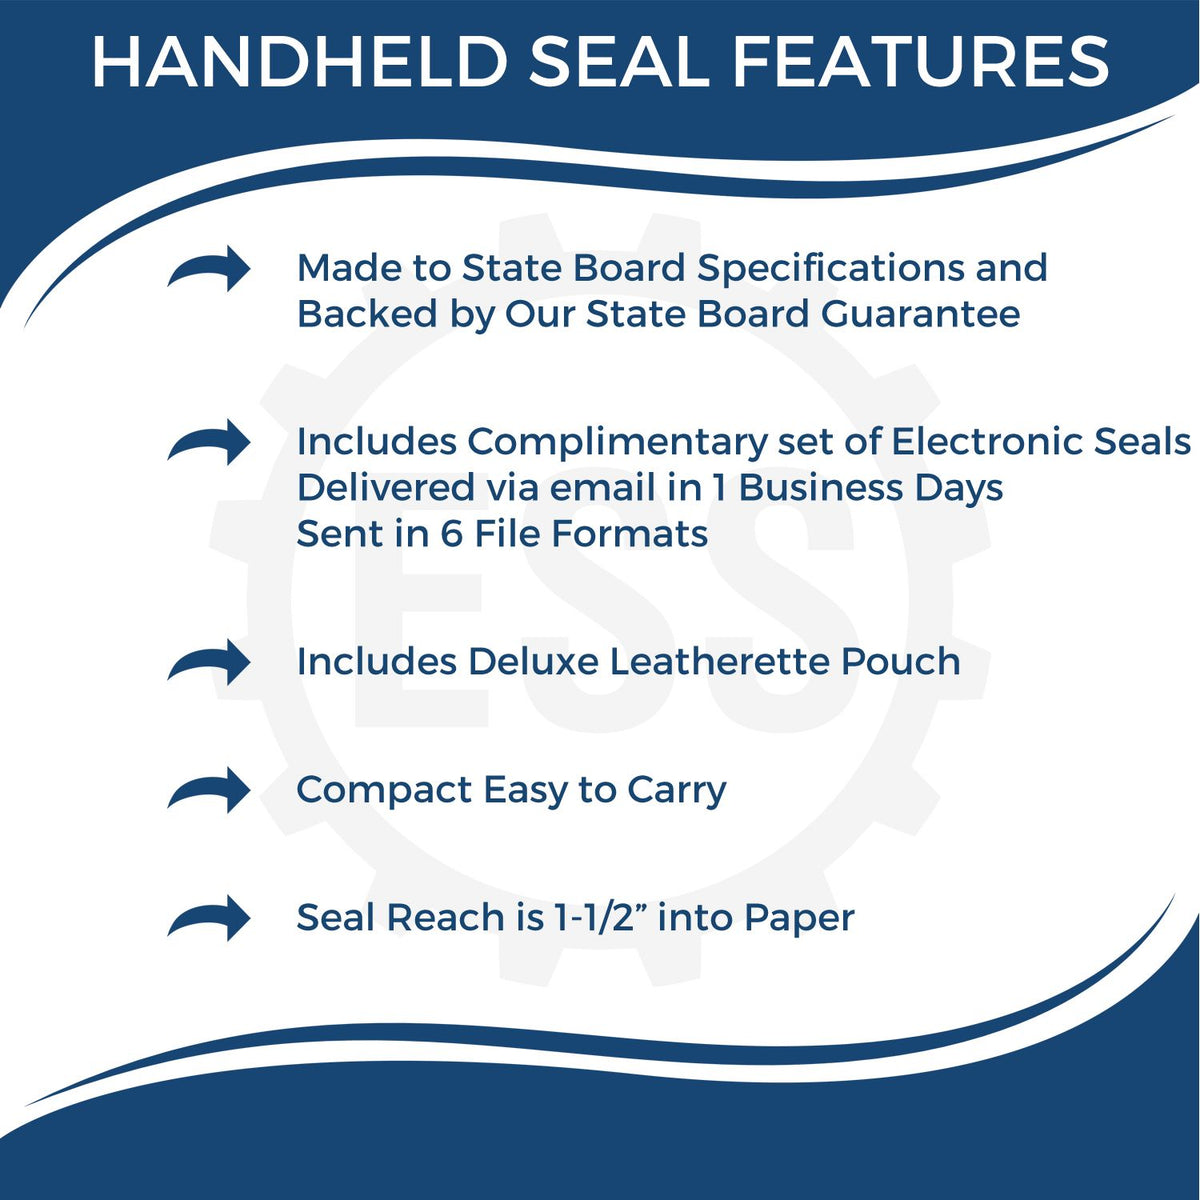 A picture of an infographic highlighting the selling points for the Handheld Delaware Land Surveyor Seal